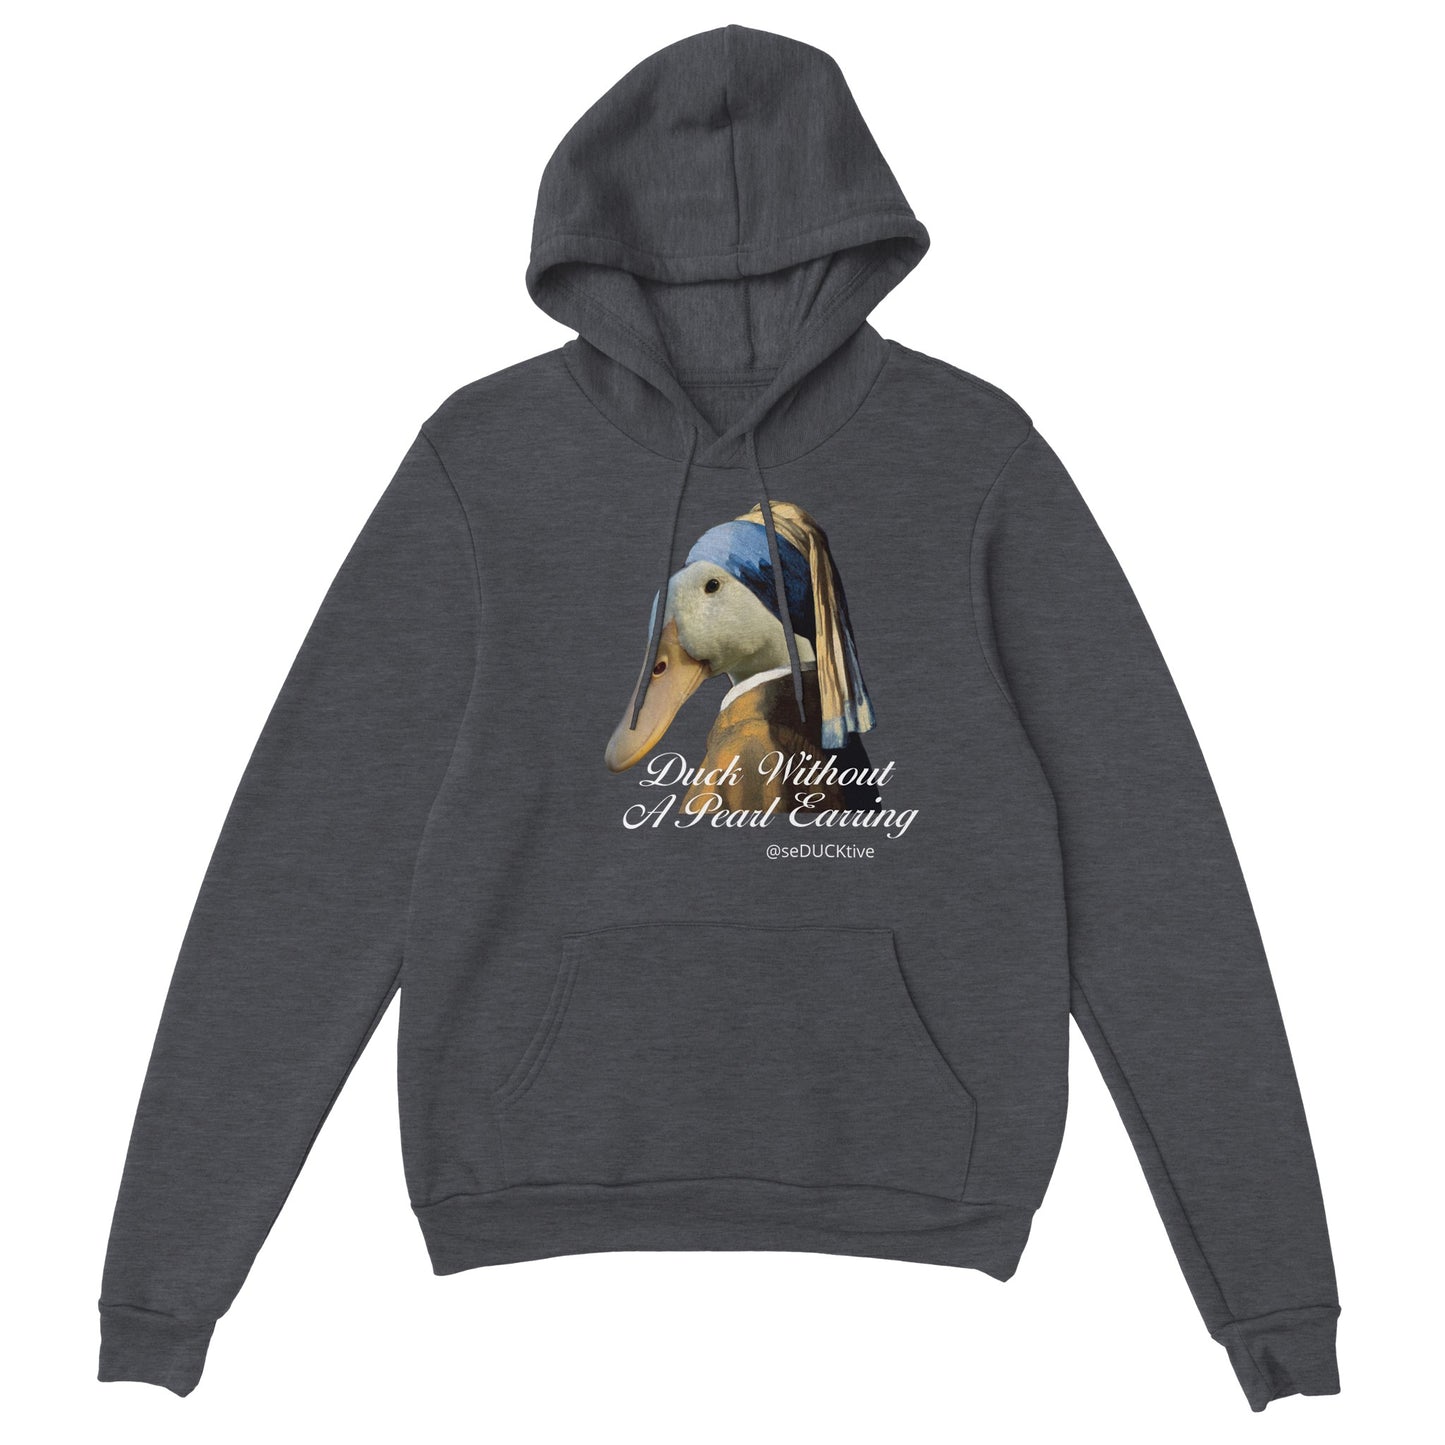 Duck Without A Pearl Earring Premium Hoodie